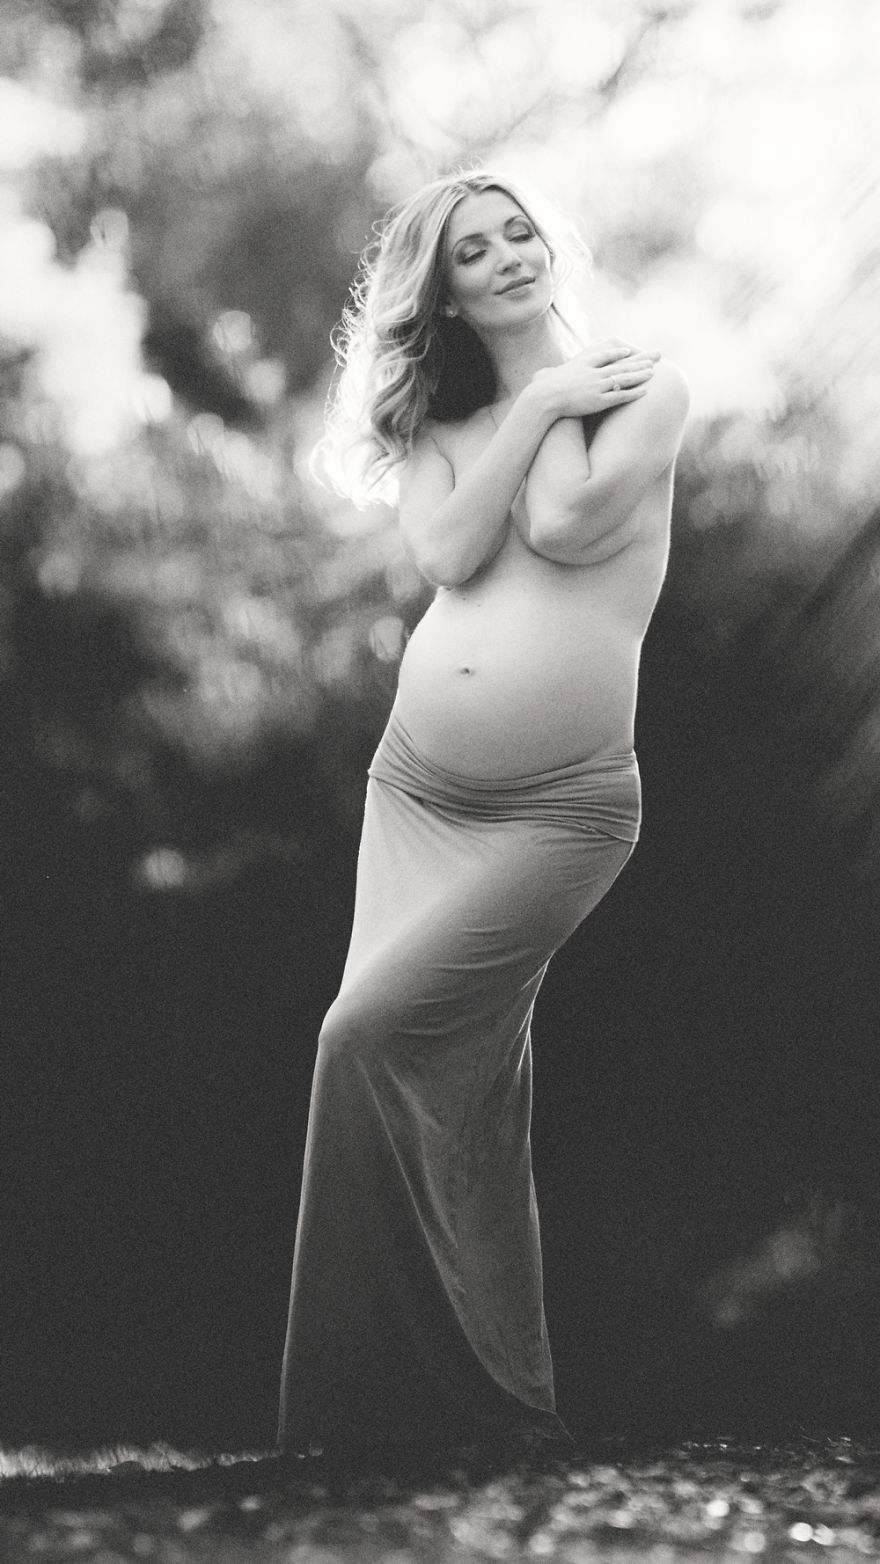 Photographer Takes Her Pregnant Models Outdoors In Any Kind Of Weather